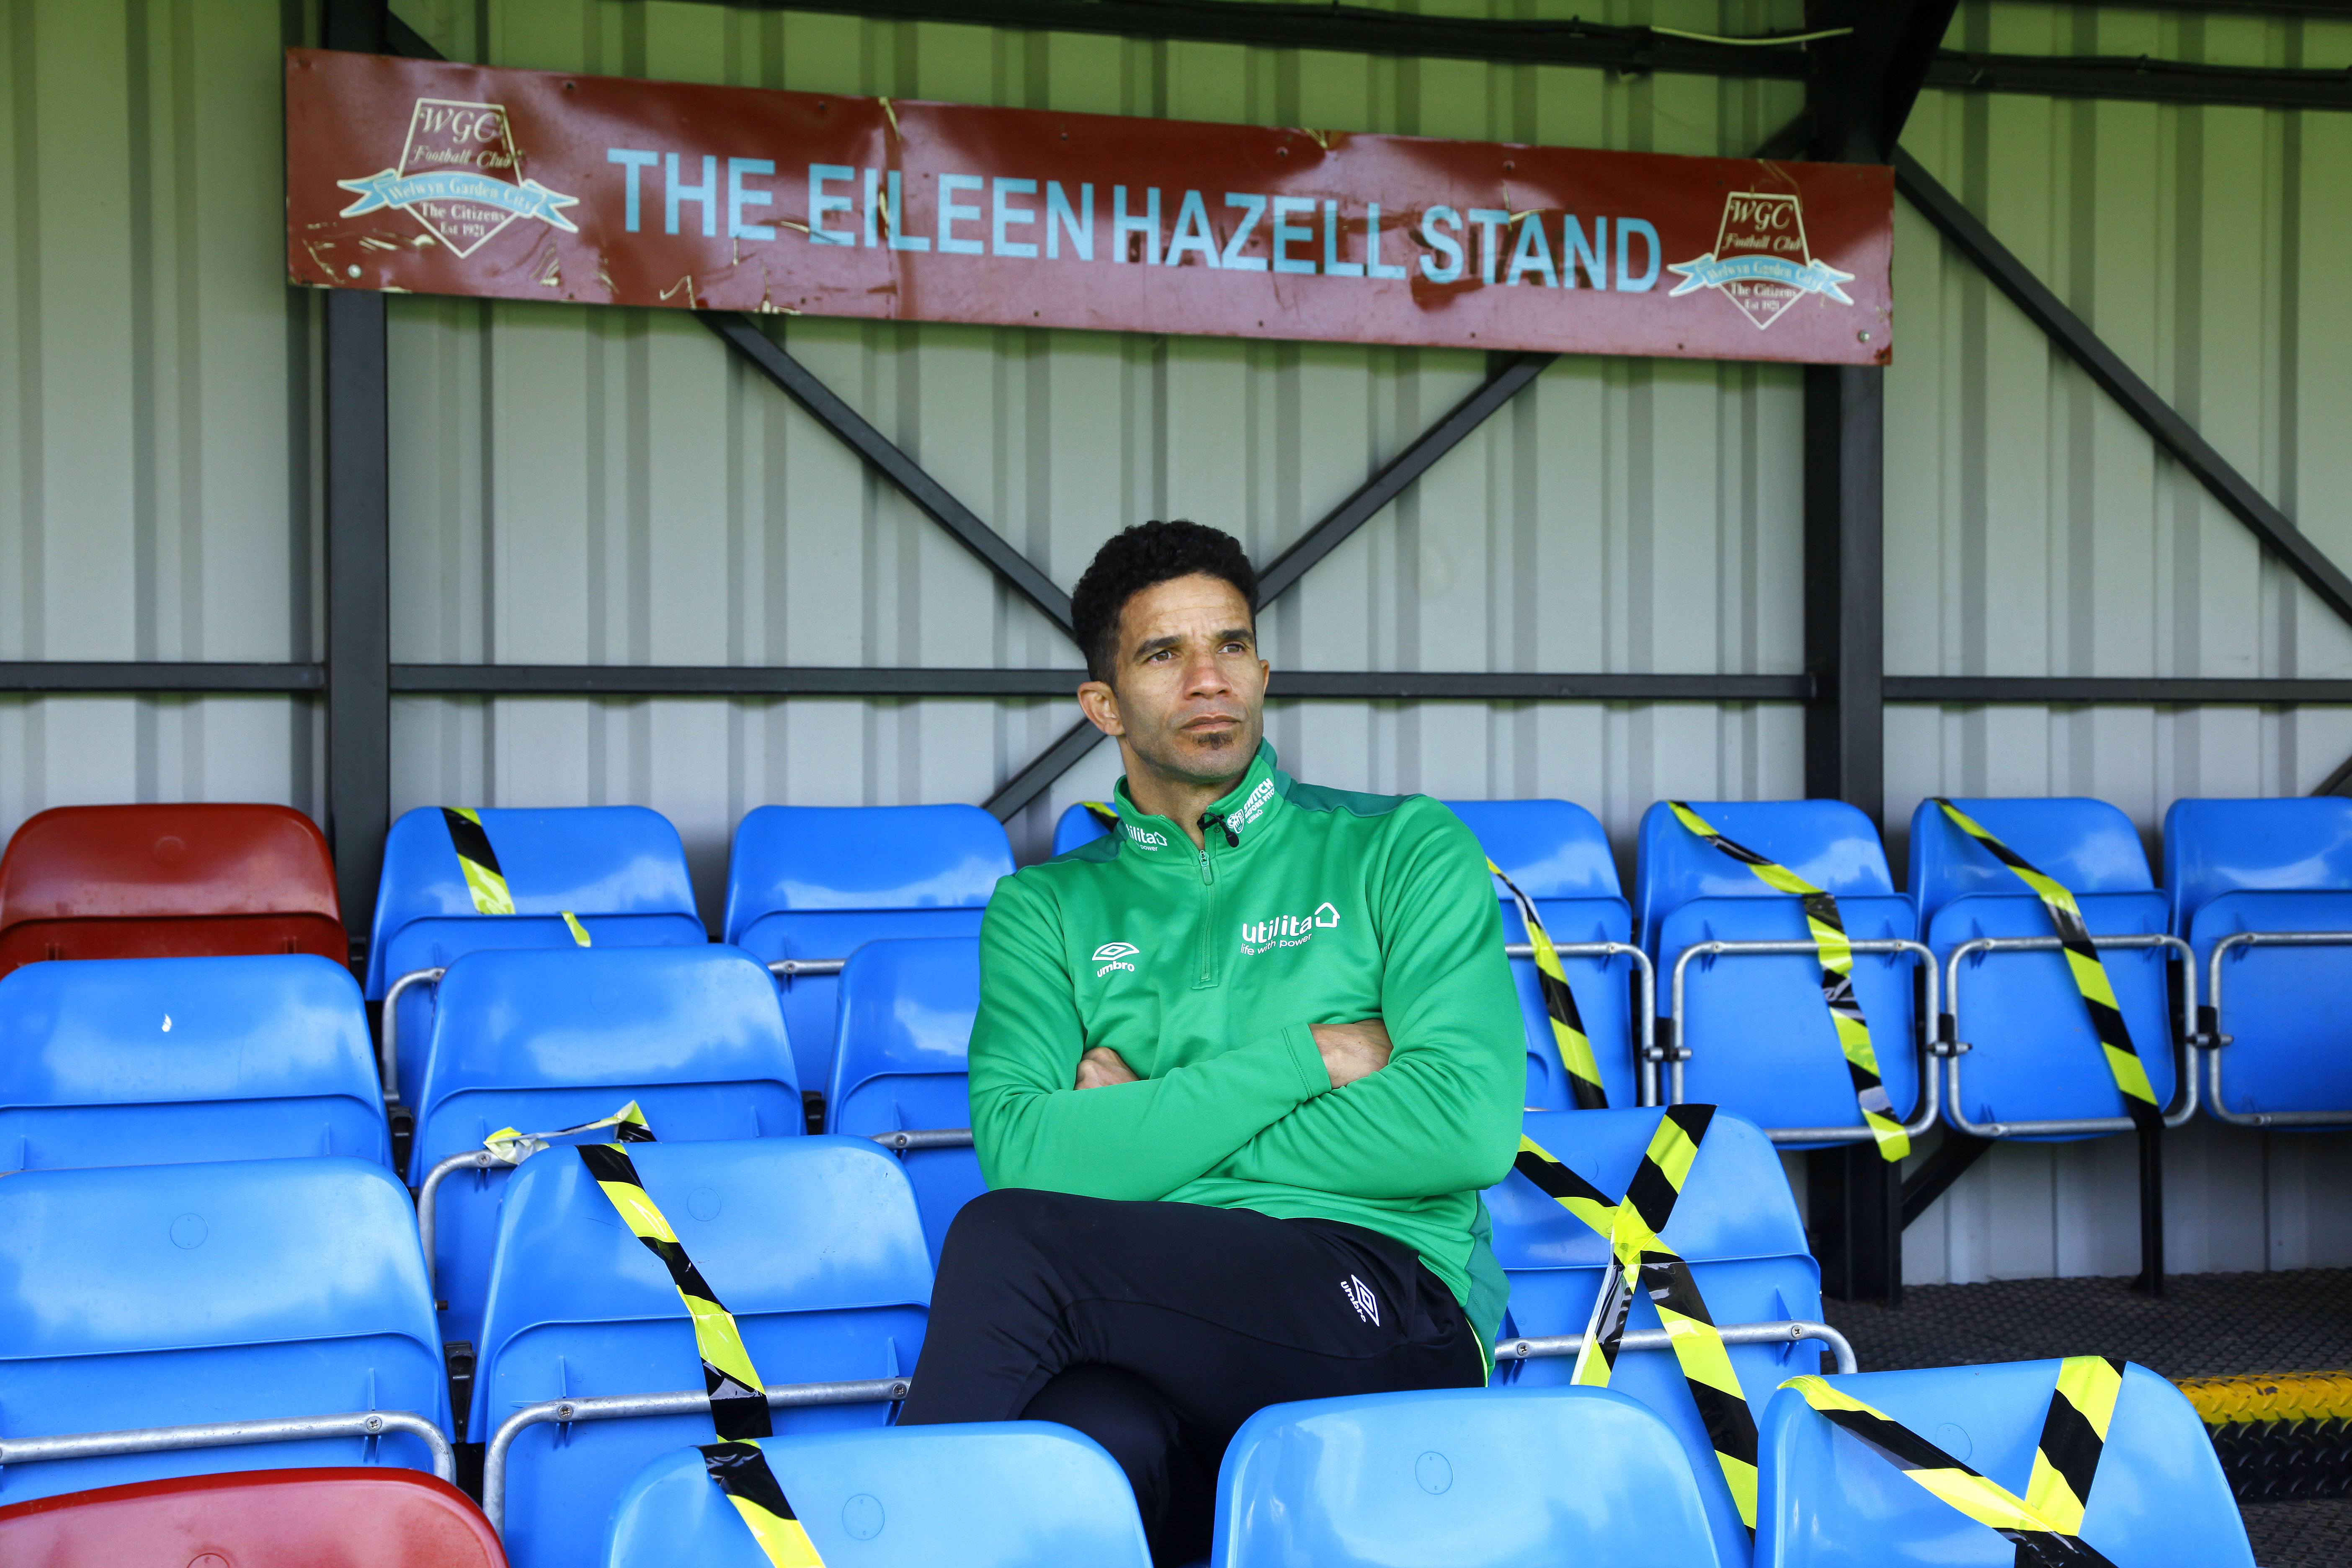 Former England goalkeeper David James visited the home of Welwyn Garden City FC to raise awareness of the effect Covid-19 is having on grassroots football.